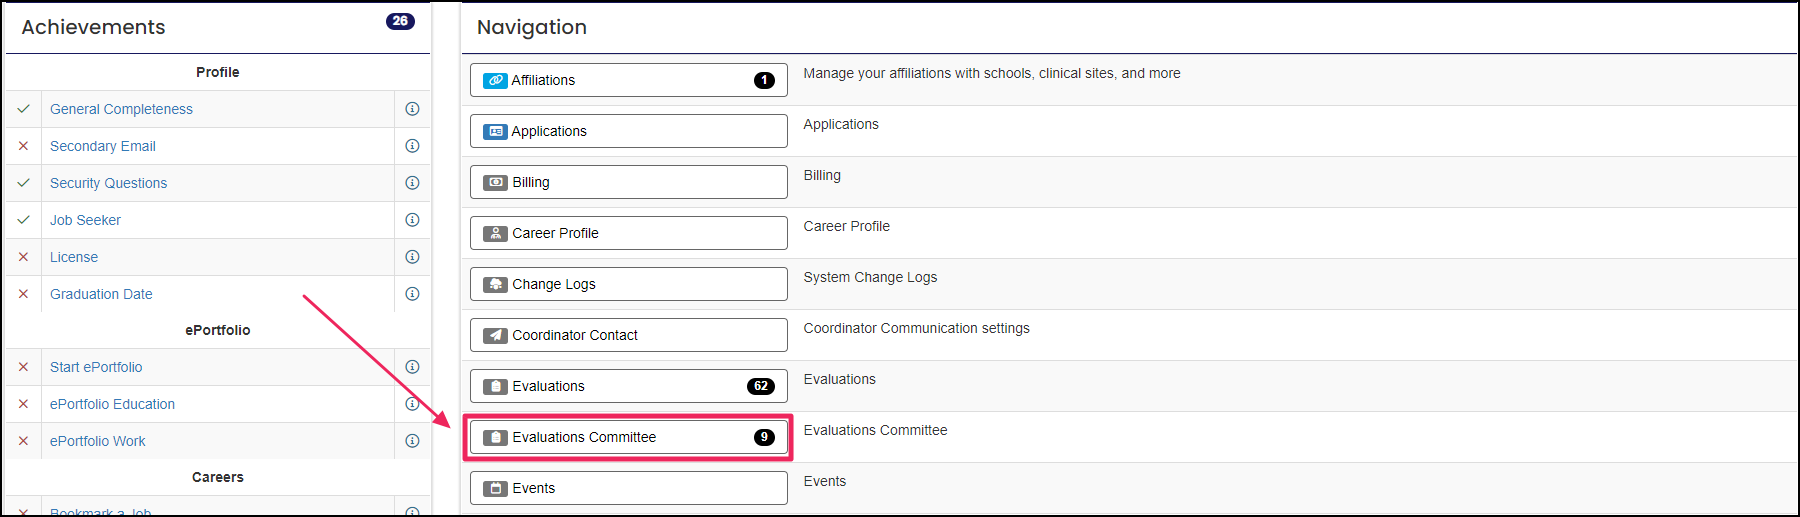 manage page highlighting the evaluations committee button.